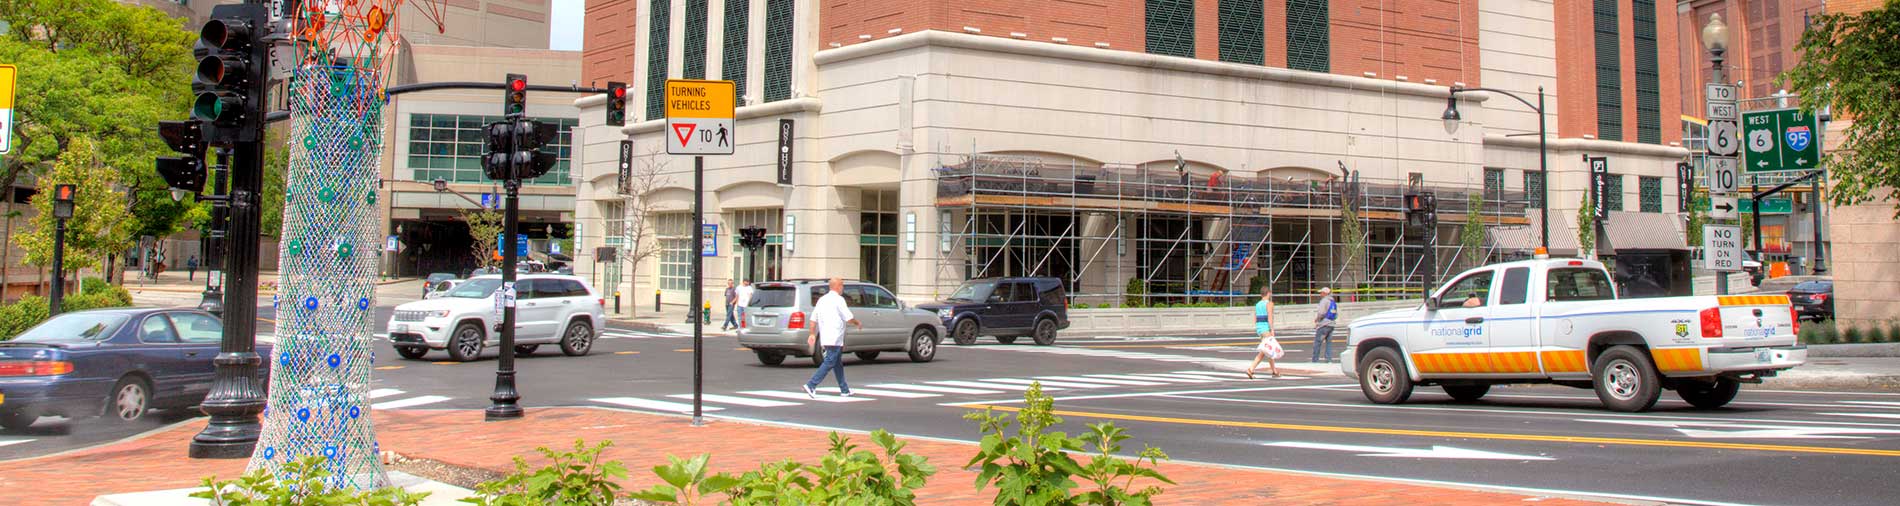 Photo of downtown Providence intersetion, with moving and stopped traffic. Pedestrians are crossing the street at crosswalks.